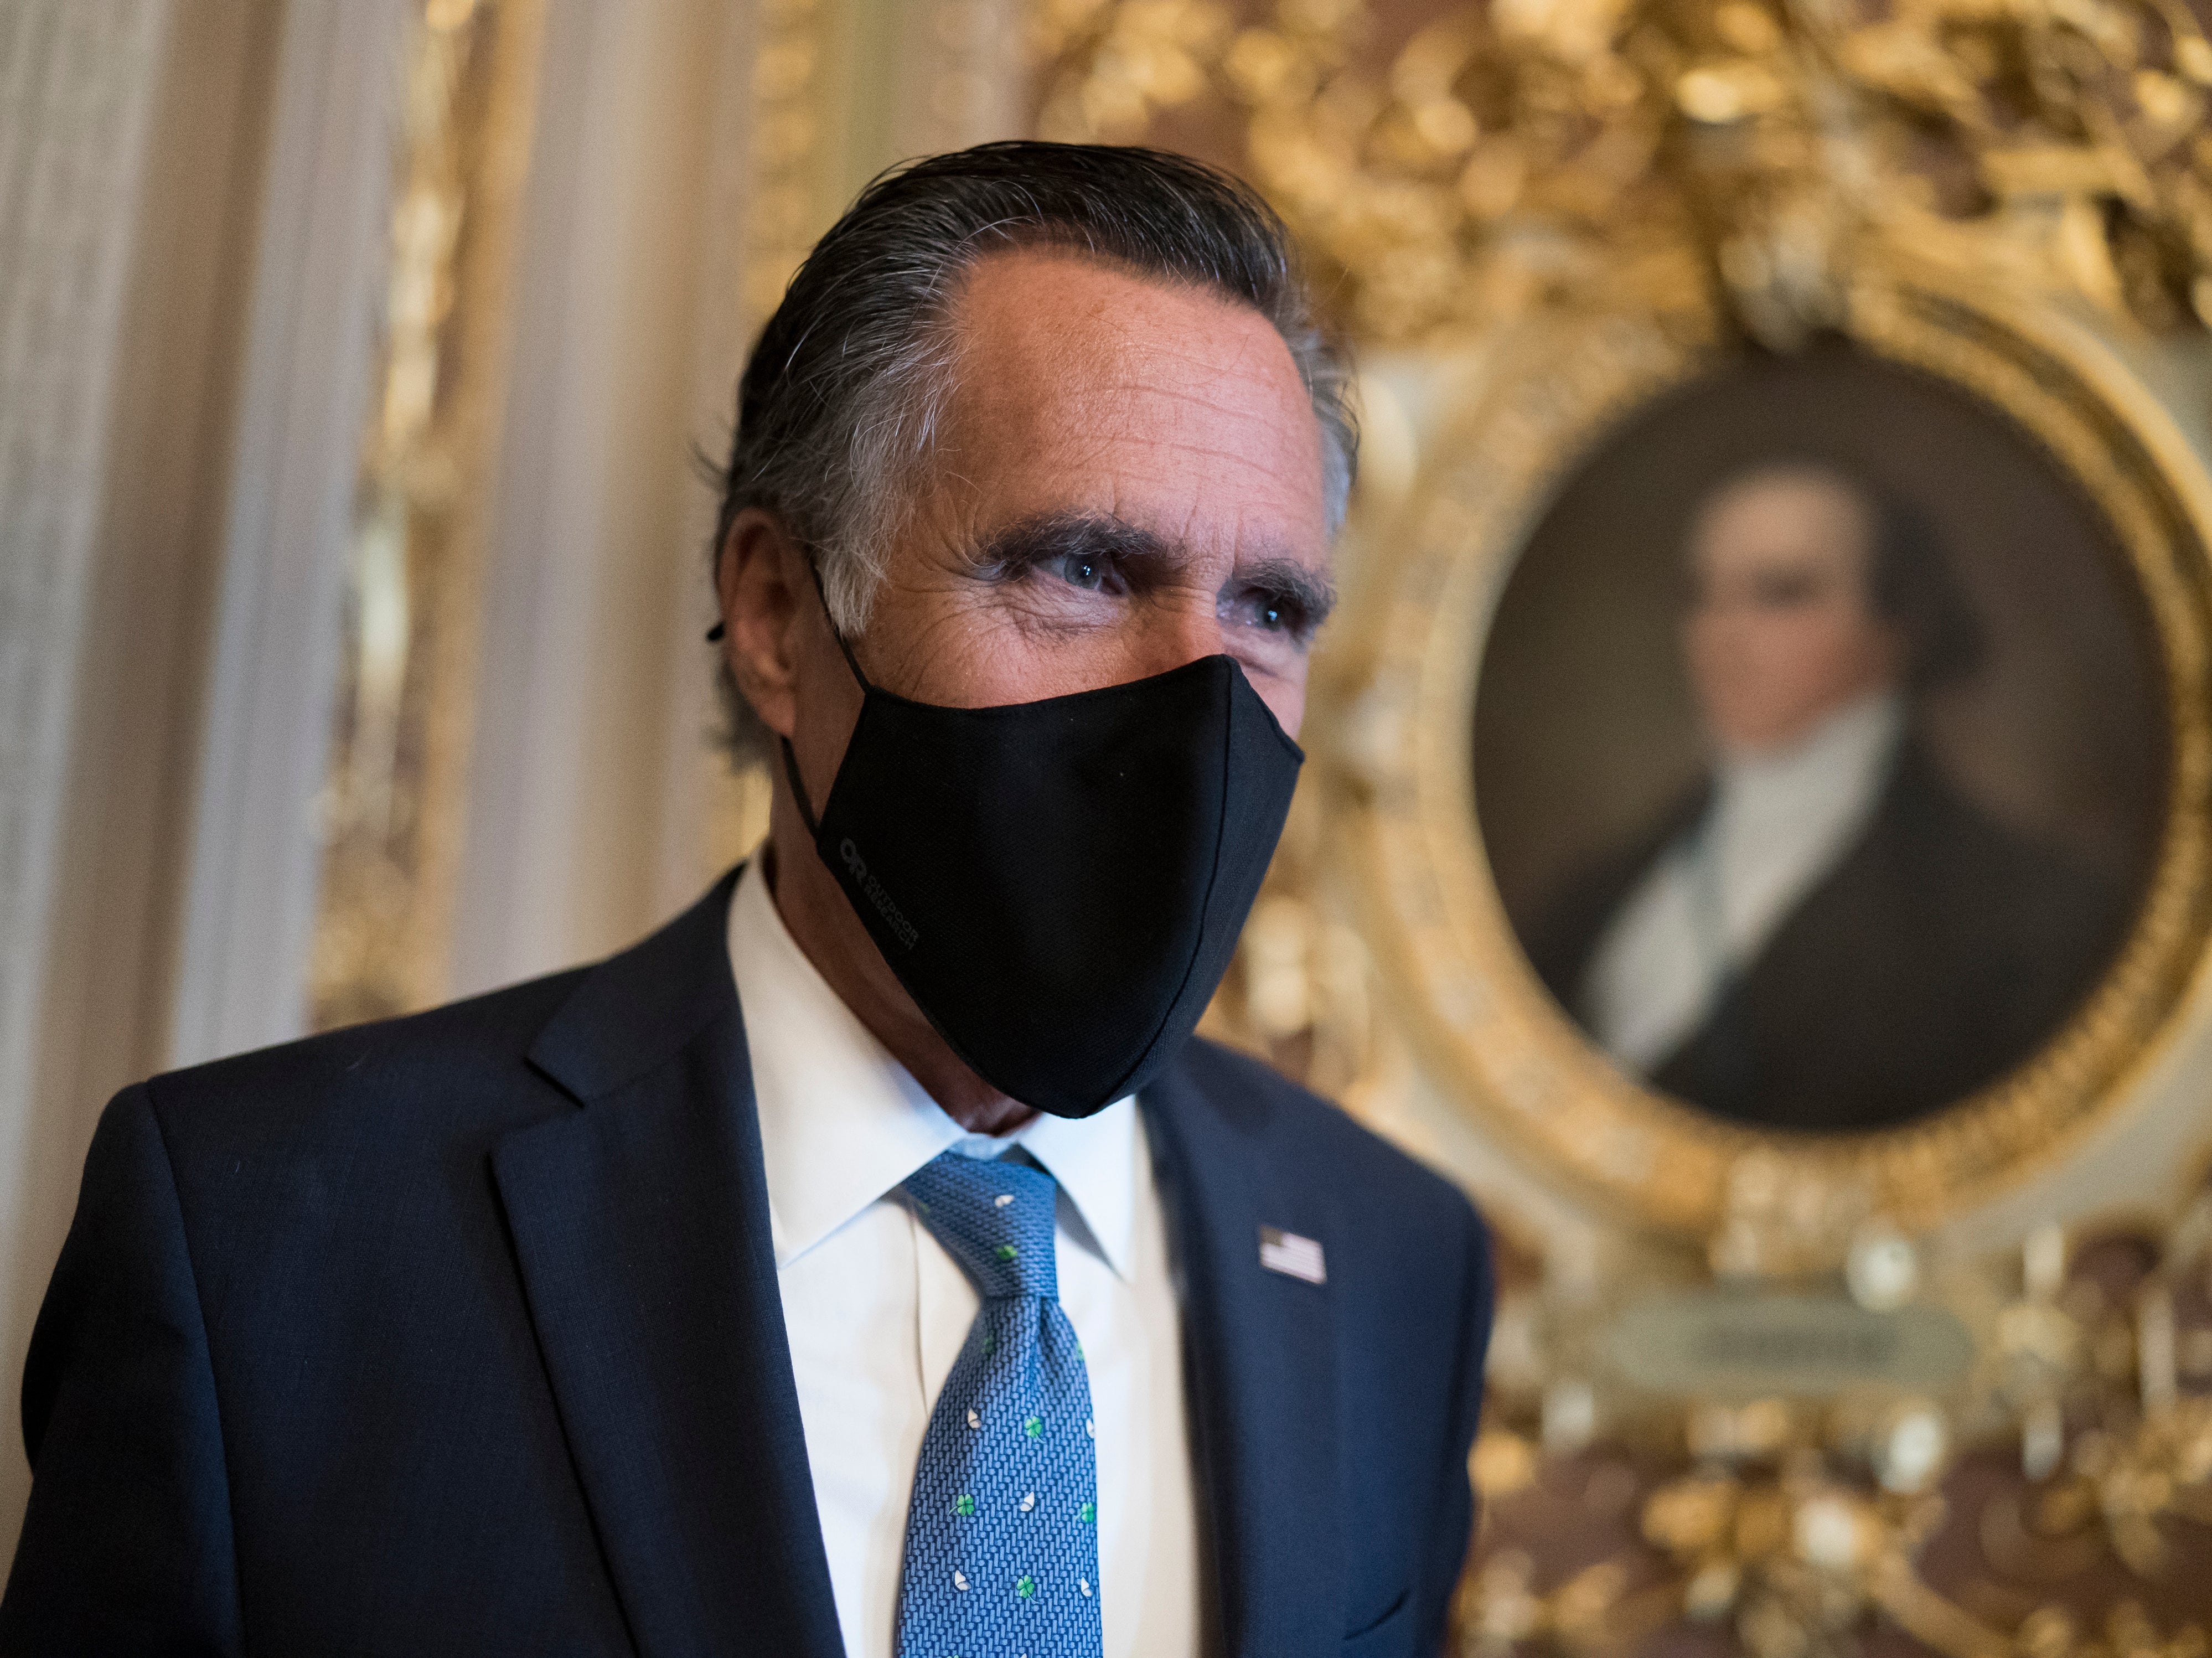 <p>Mitt Romney, R-Utah, pauses to answer questions from reporters as senators arrive to vote on President Joe Biden’s nominee for United Nation’s ambassador, Linda Thomas-Greenfield, at the Capitol in Washington, on Tuesday 23 February 2021</p>